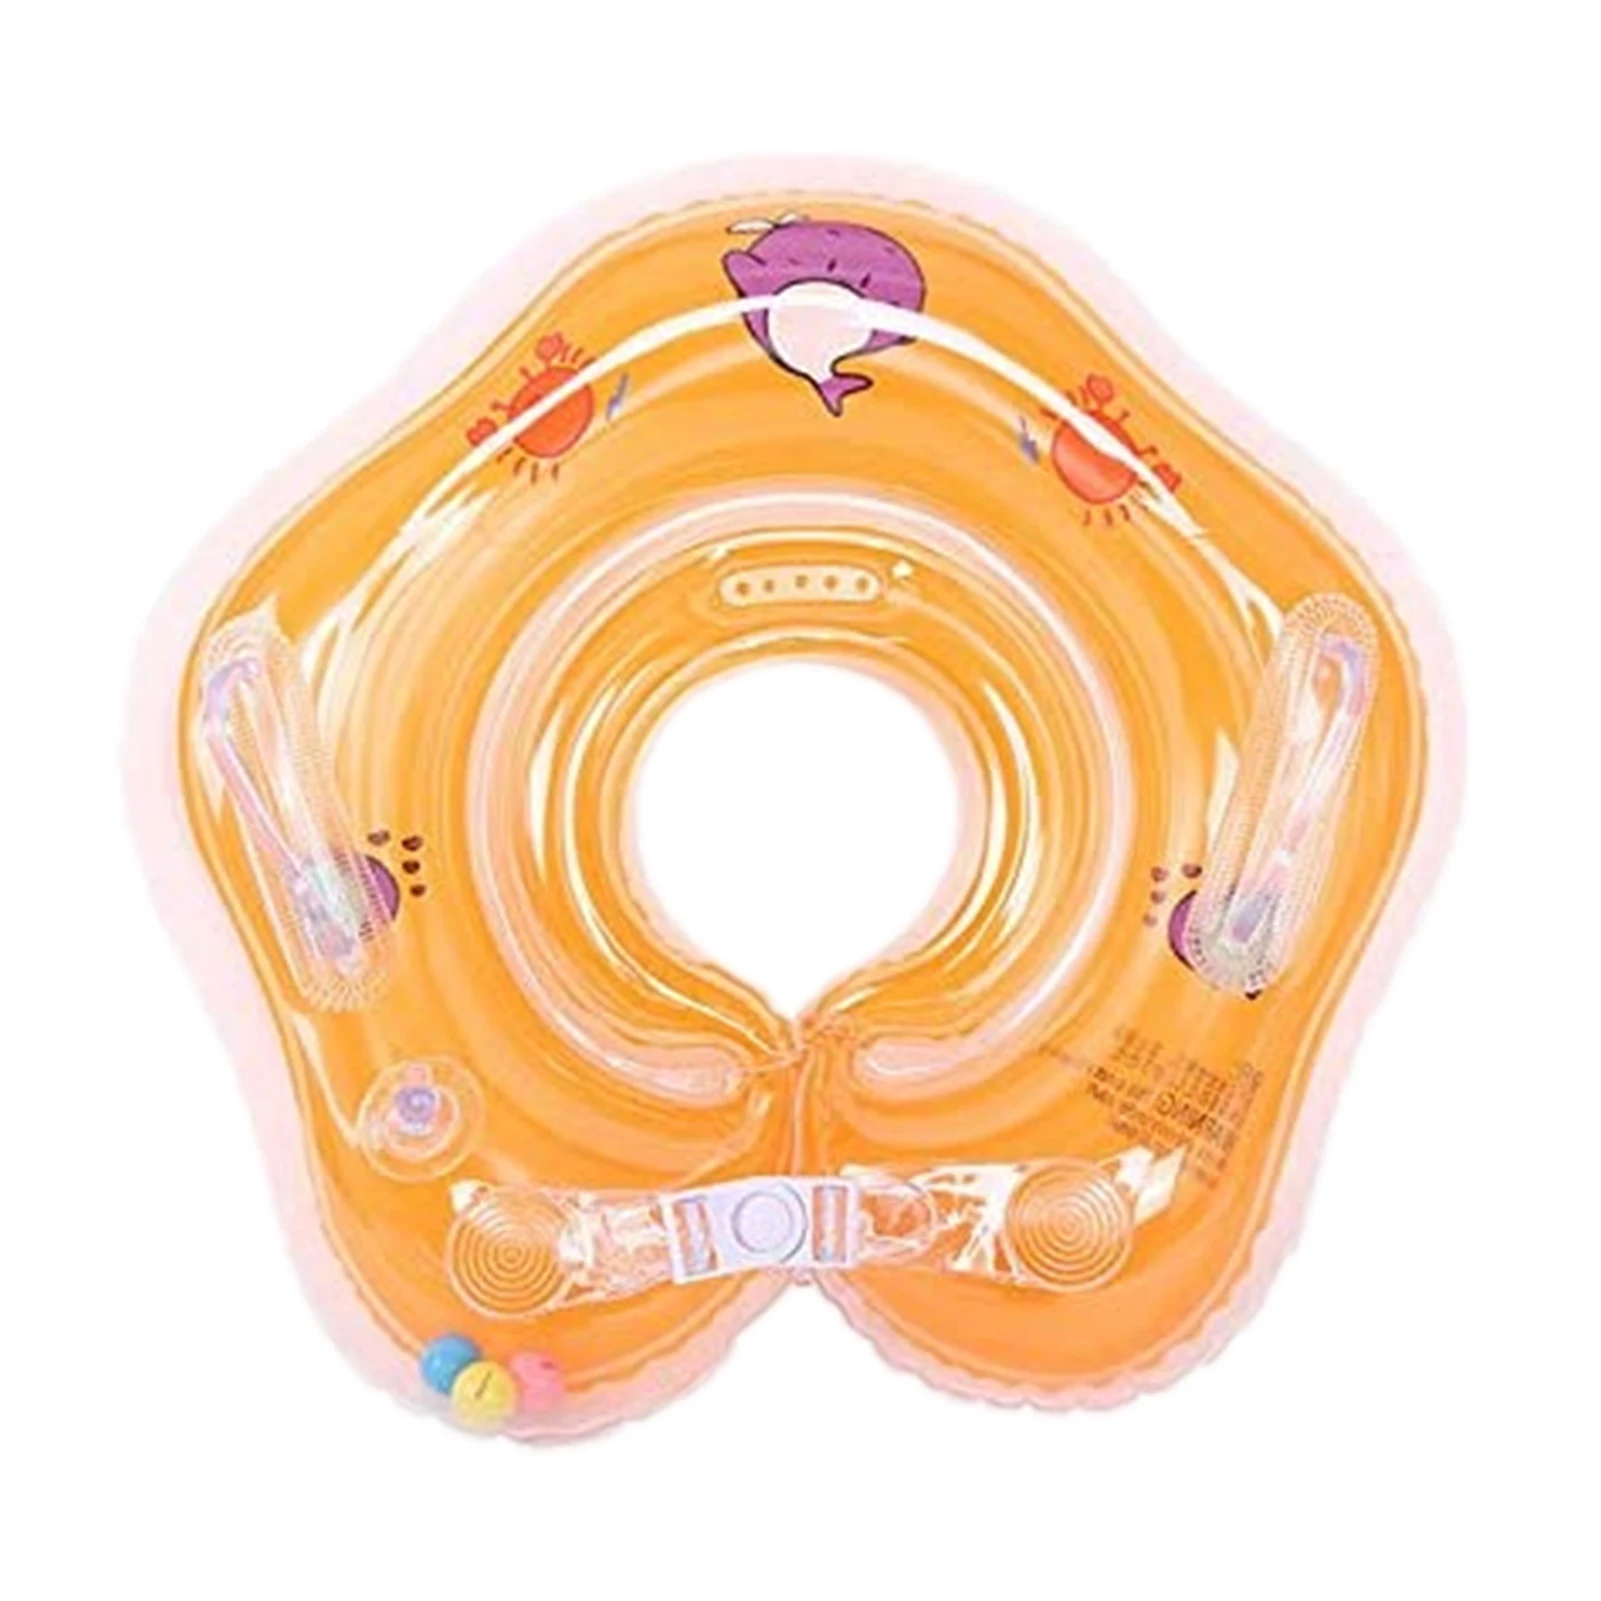 

Newborn Baby Kids Infant Swimming Protector Neck Float Ring Safety Life Buoy Life Saver Neck Collar Swiming Inflatable Tube #P